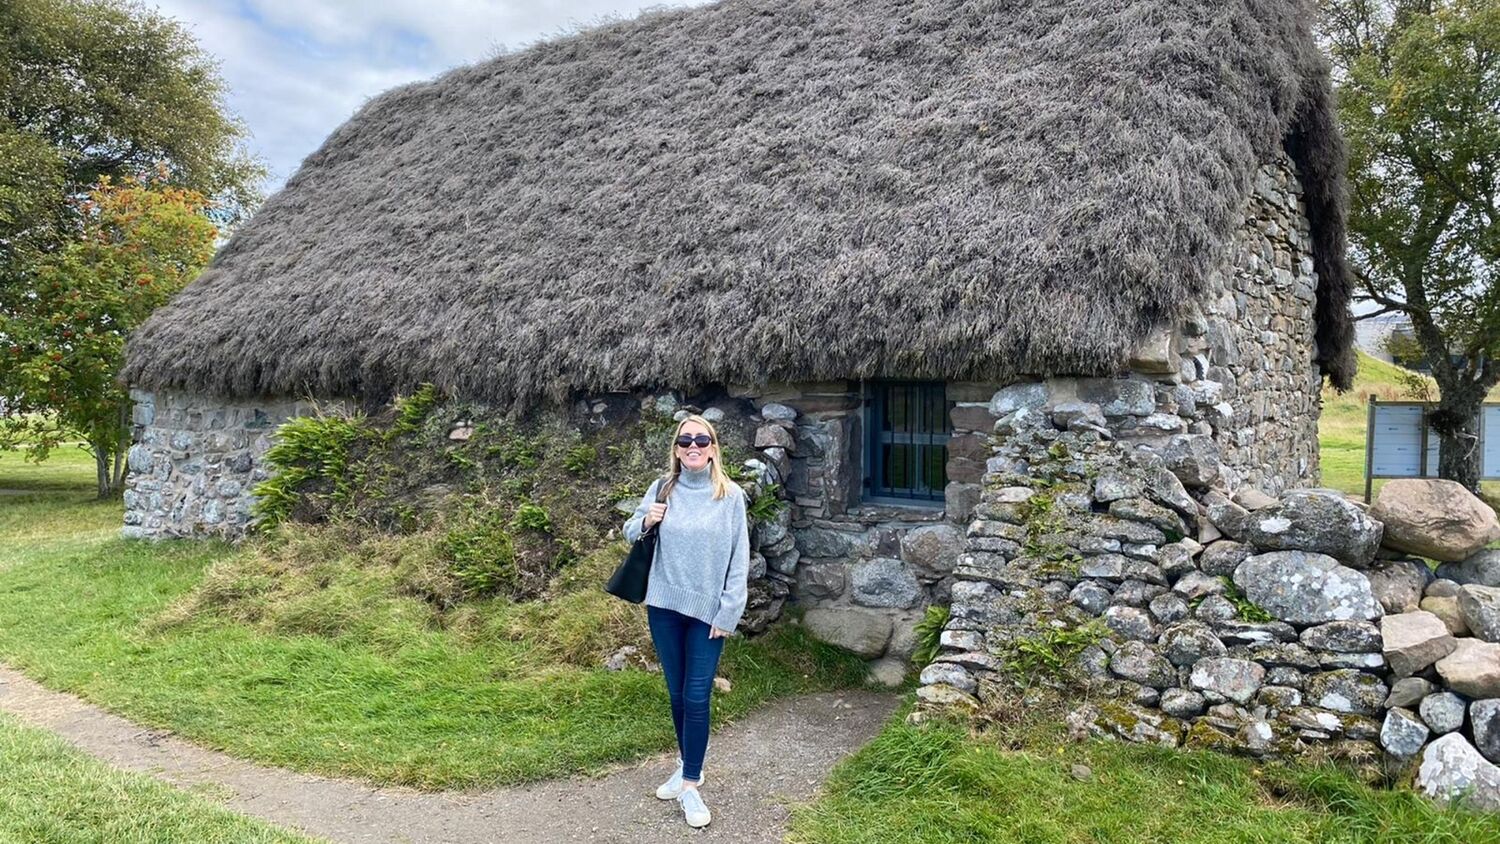 A smiling young woman stands on a narrow path outside a thatched cottage. It is a sunny day and she wears sunglasses.